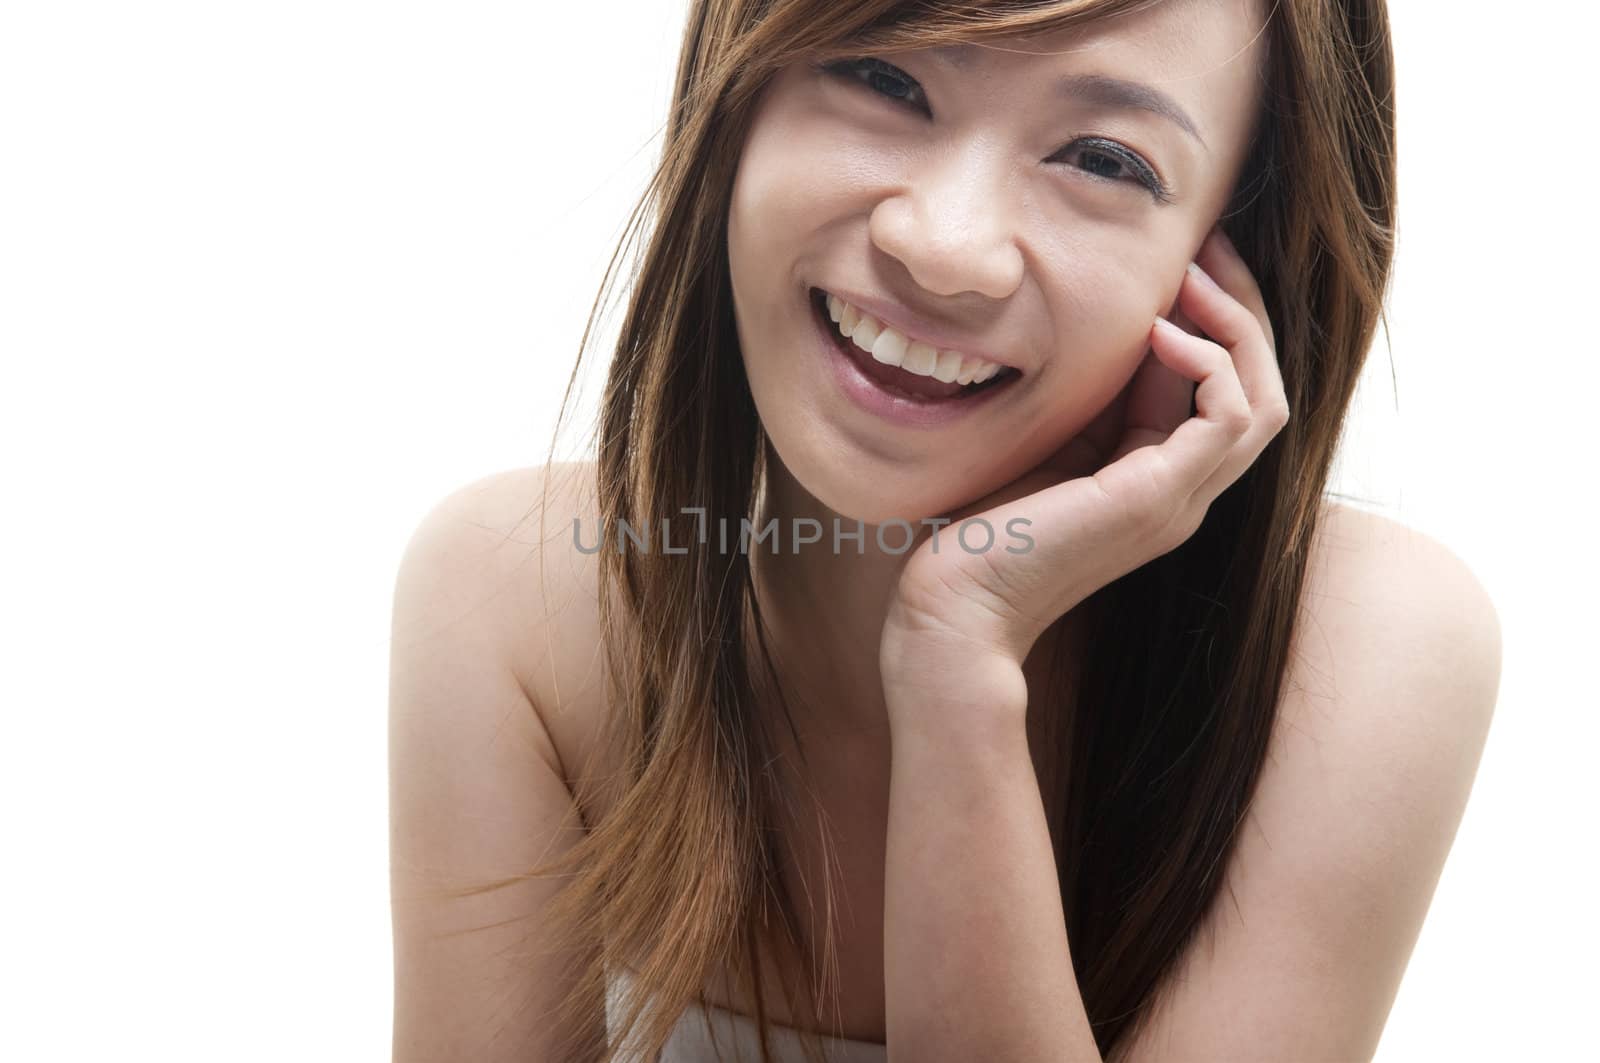 Cute Asian female smiling on white background